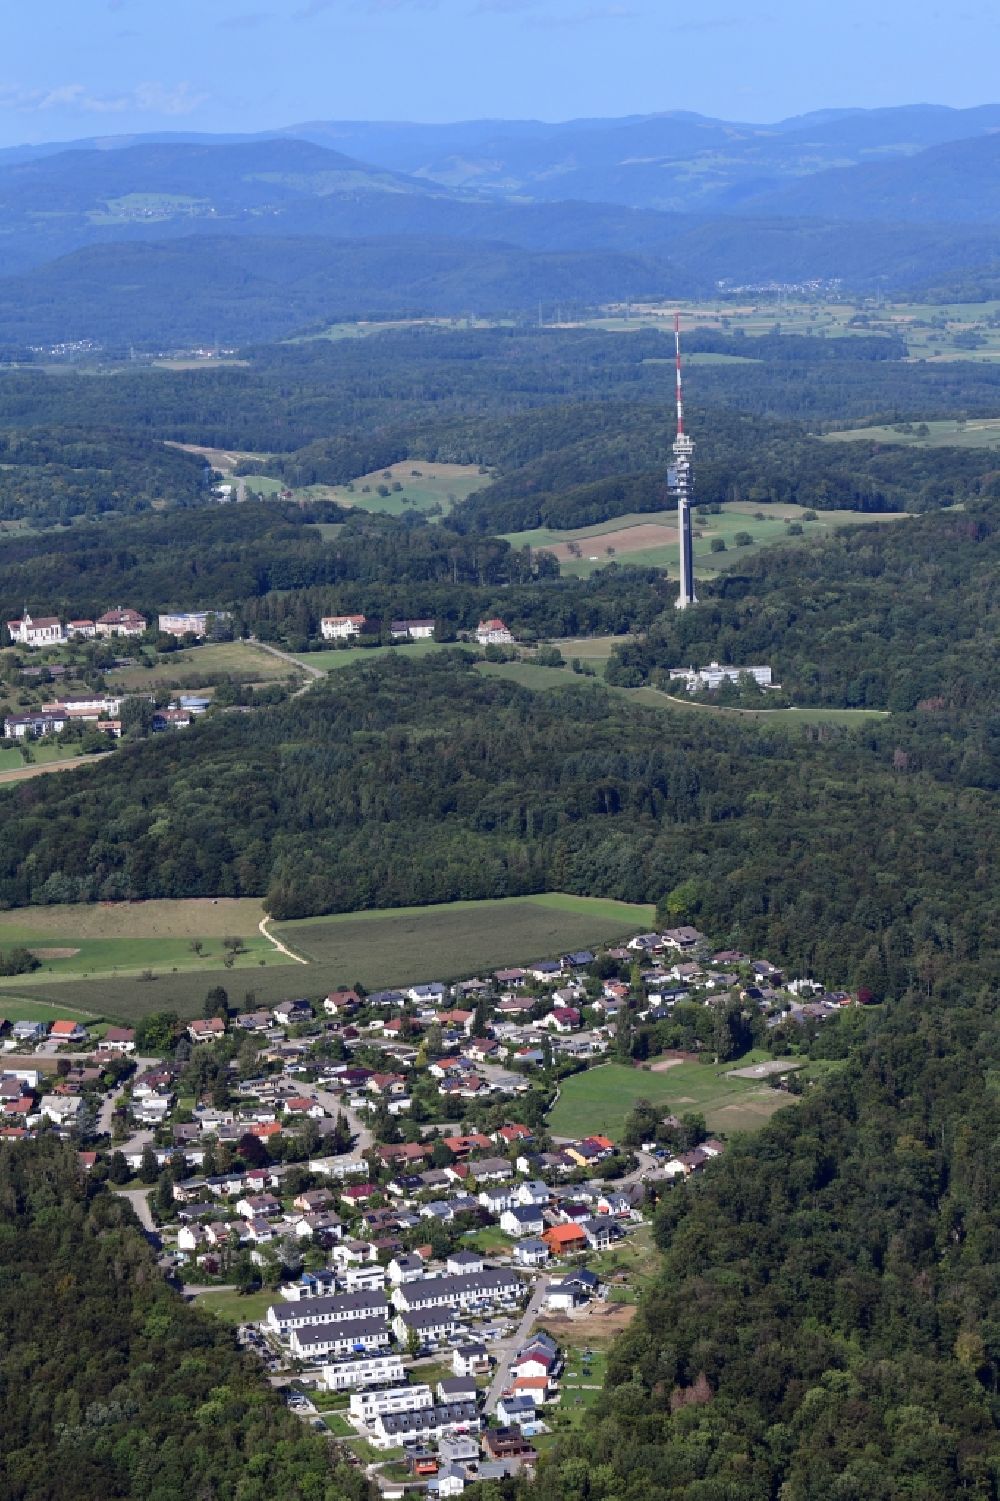 Aerial photograph Grenzach-Wyhlen - Residential area and district Neufeld in in Grenzach-Wyhlen in the state Baden-Wurttemberg, Germany. Looking to the landmark and television tower St. Chrischona in Switzerland